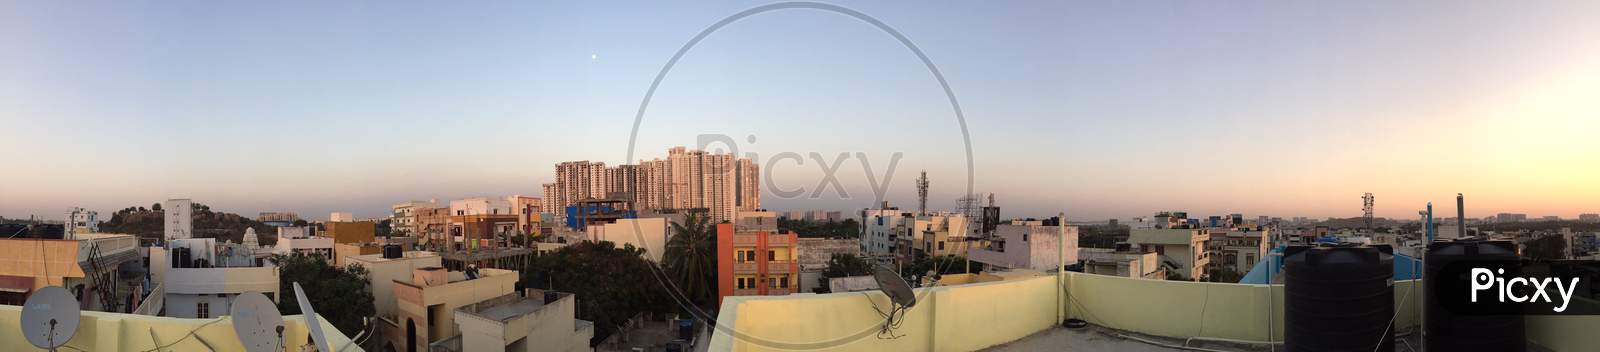 Panorama Of a City Scape With  Residential Houses